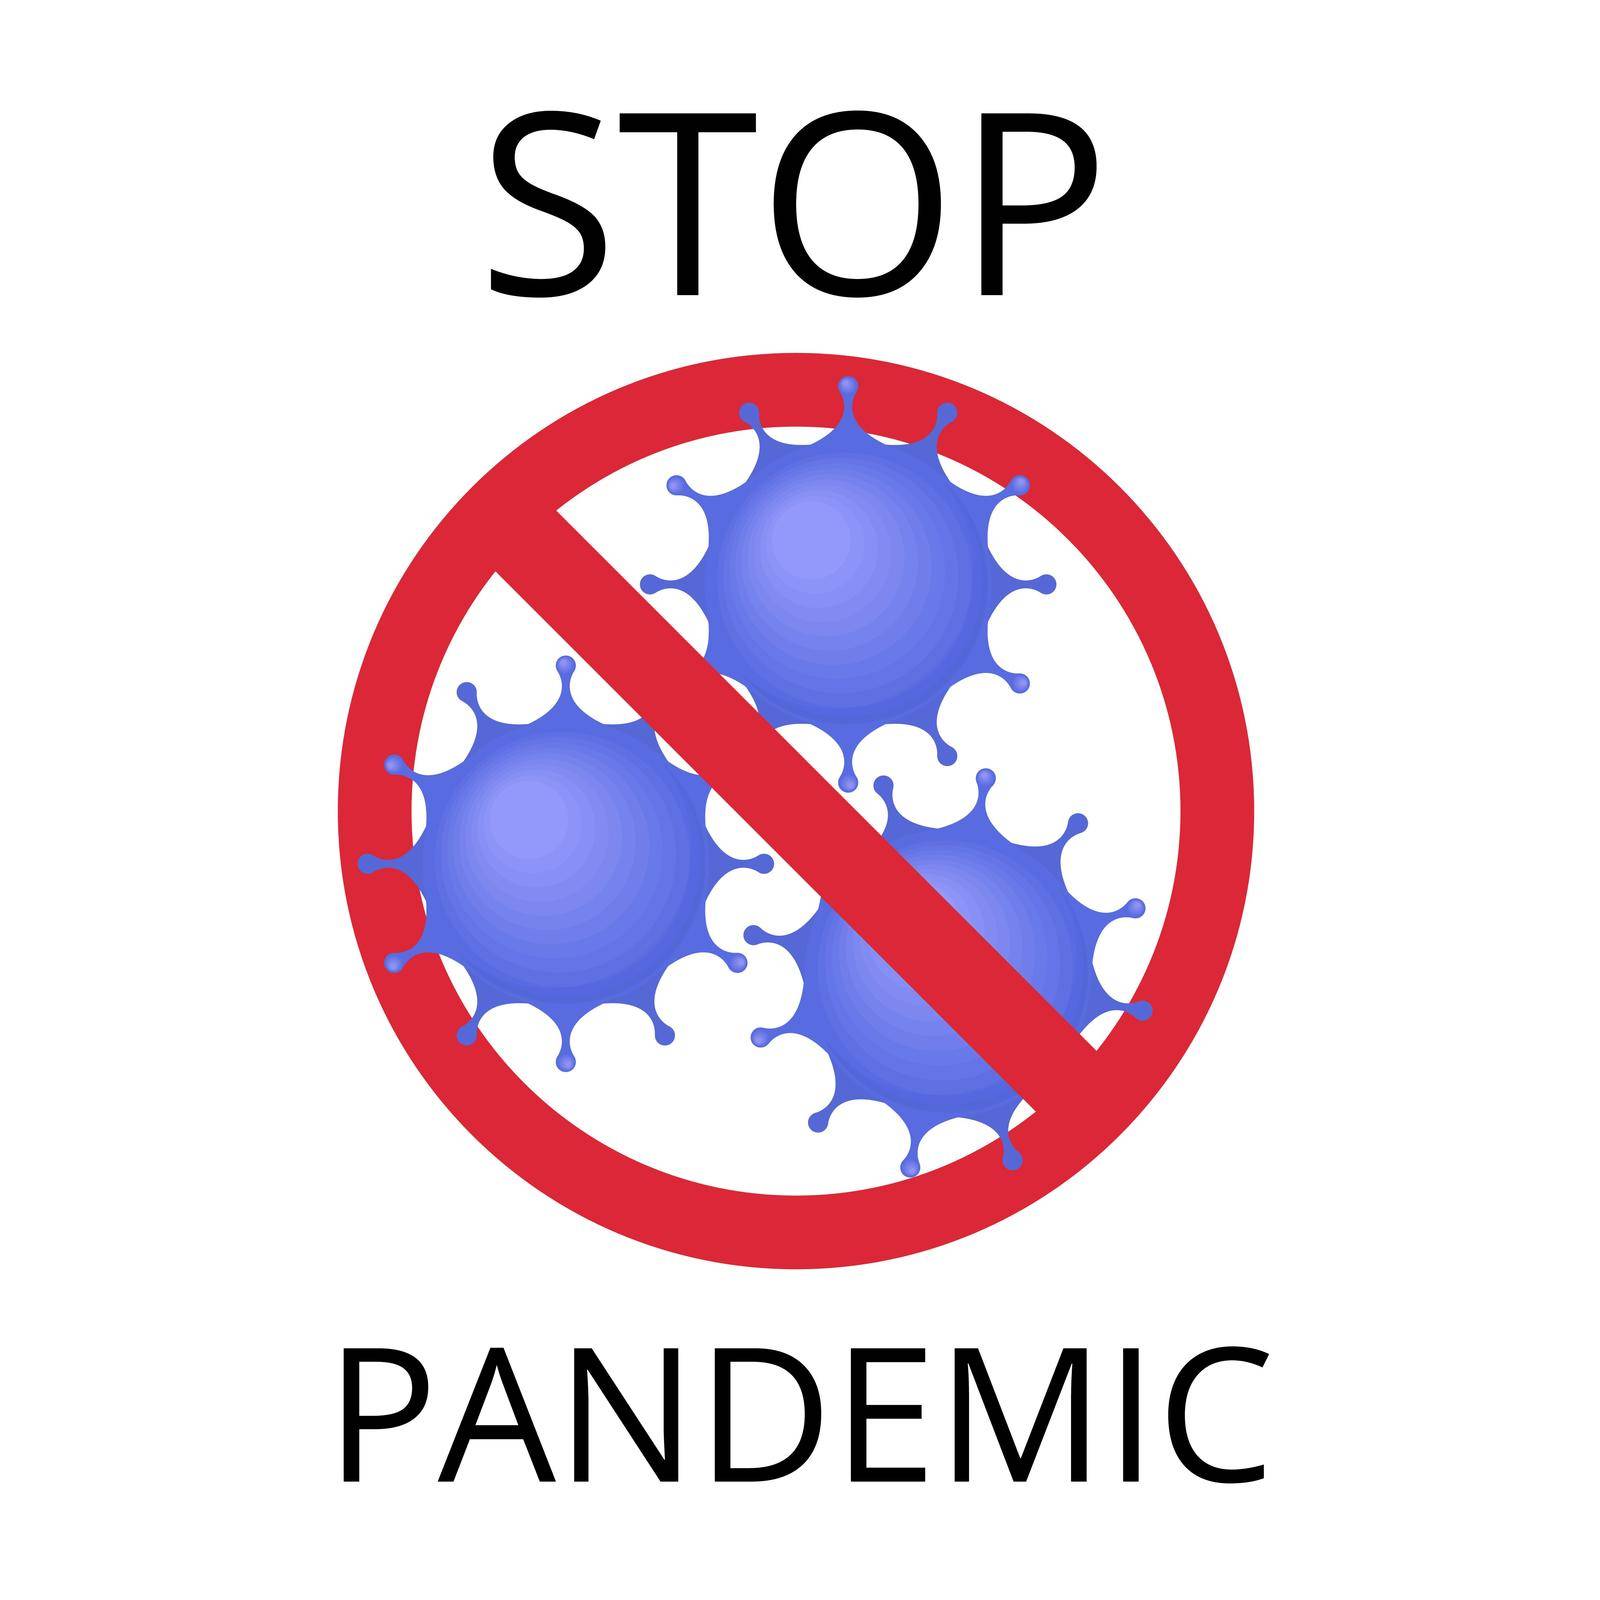 Stop pandemic warning. nCov 2019 concept.Coronavirus, pandemic concept. Can be used as flyer, banner or print. Flat cartoon illustration isolated on white background in cartoon style